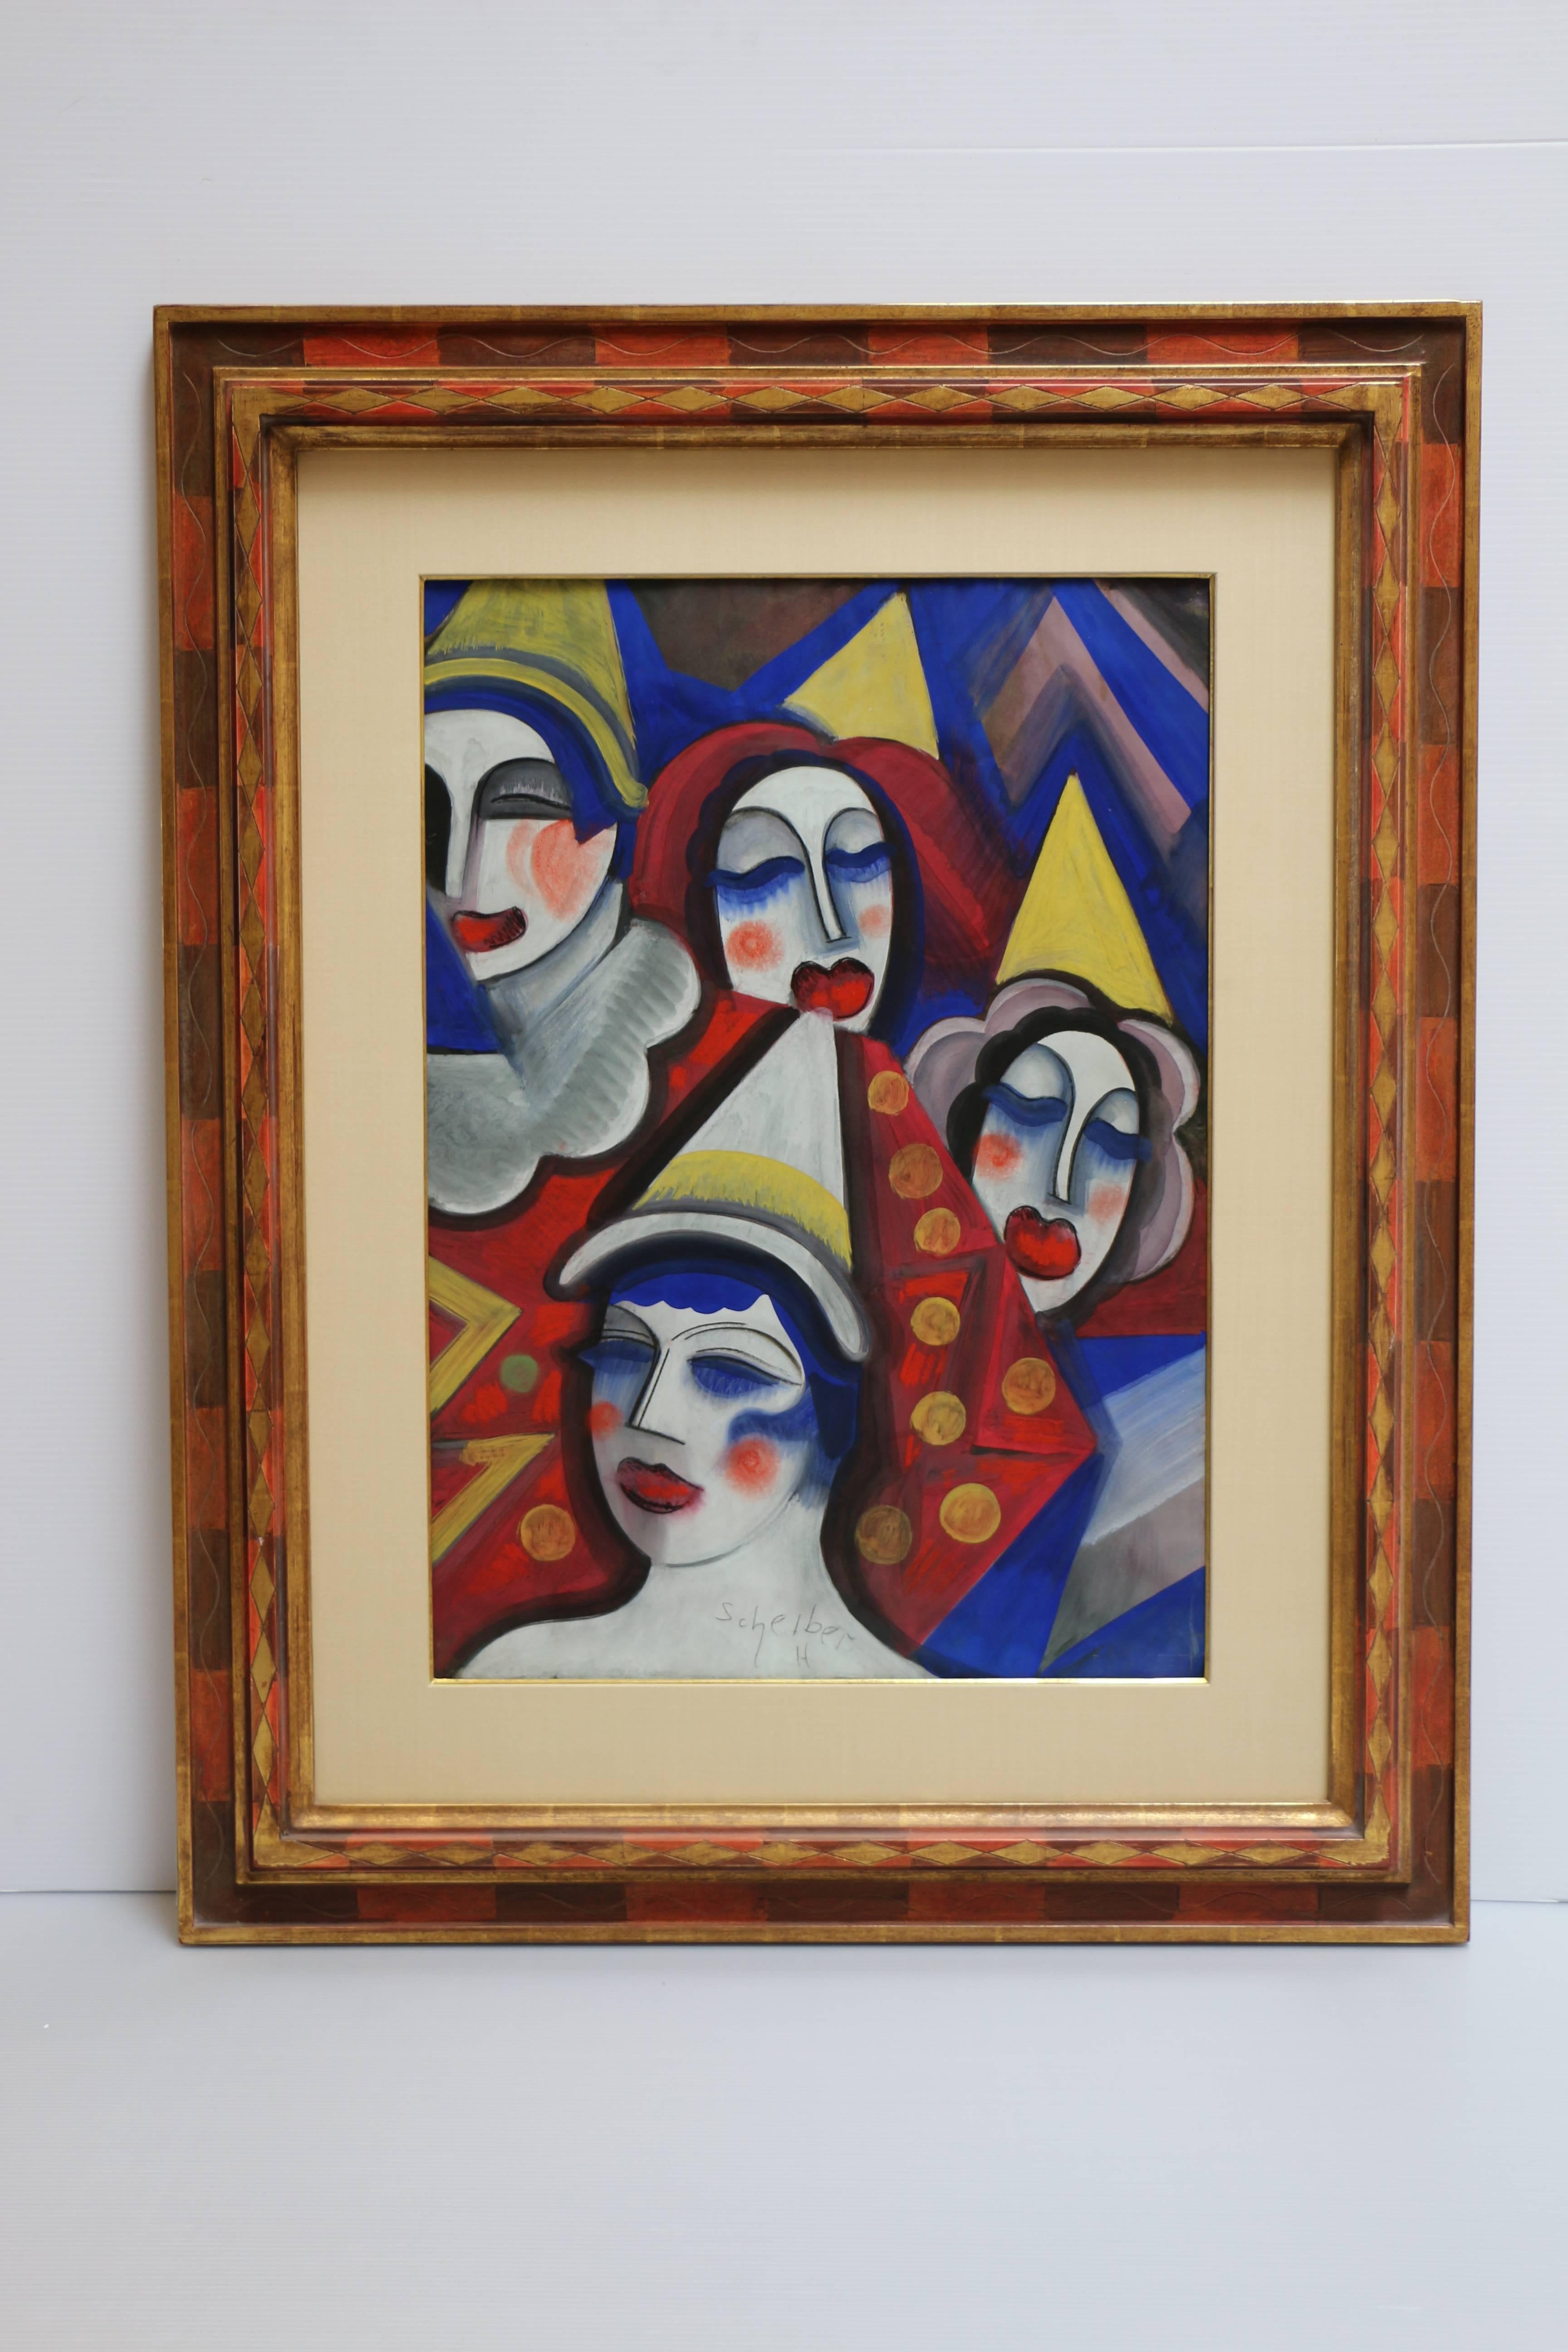 Four Clowns, original tempera on paper portrayal of colorful clowns - Painting by Hugó Scheiber